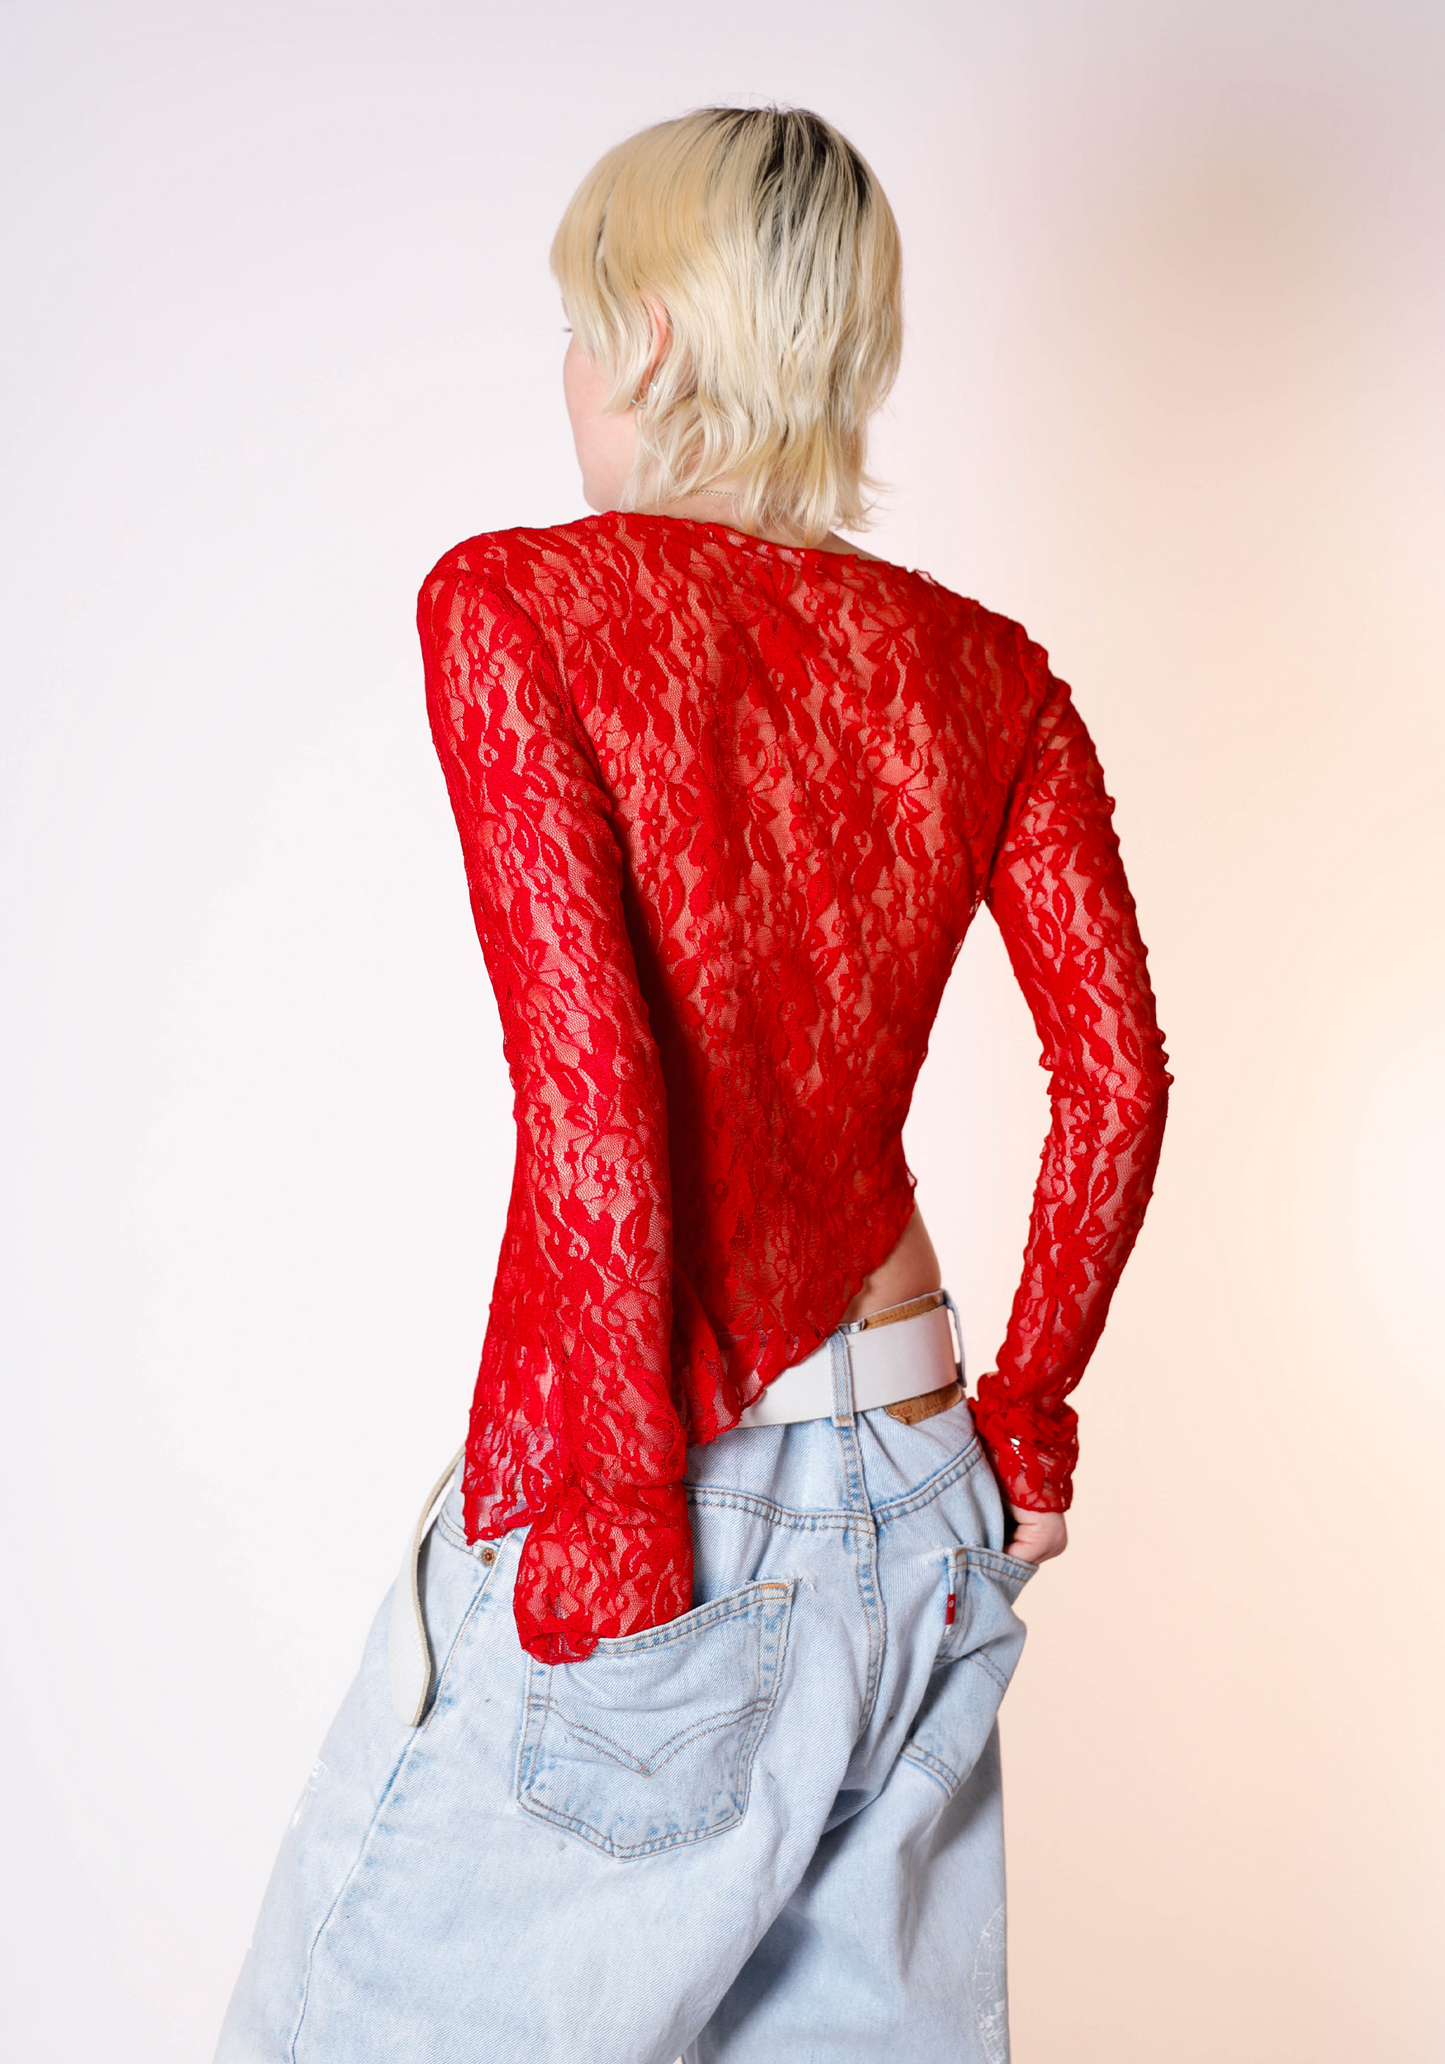 Demeter Long Sleeve Top in Cherry Lace